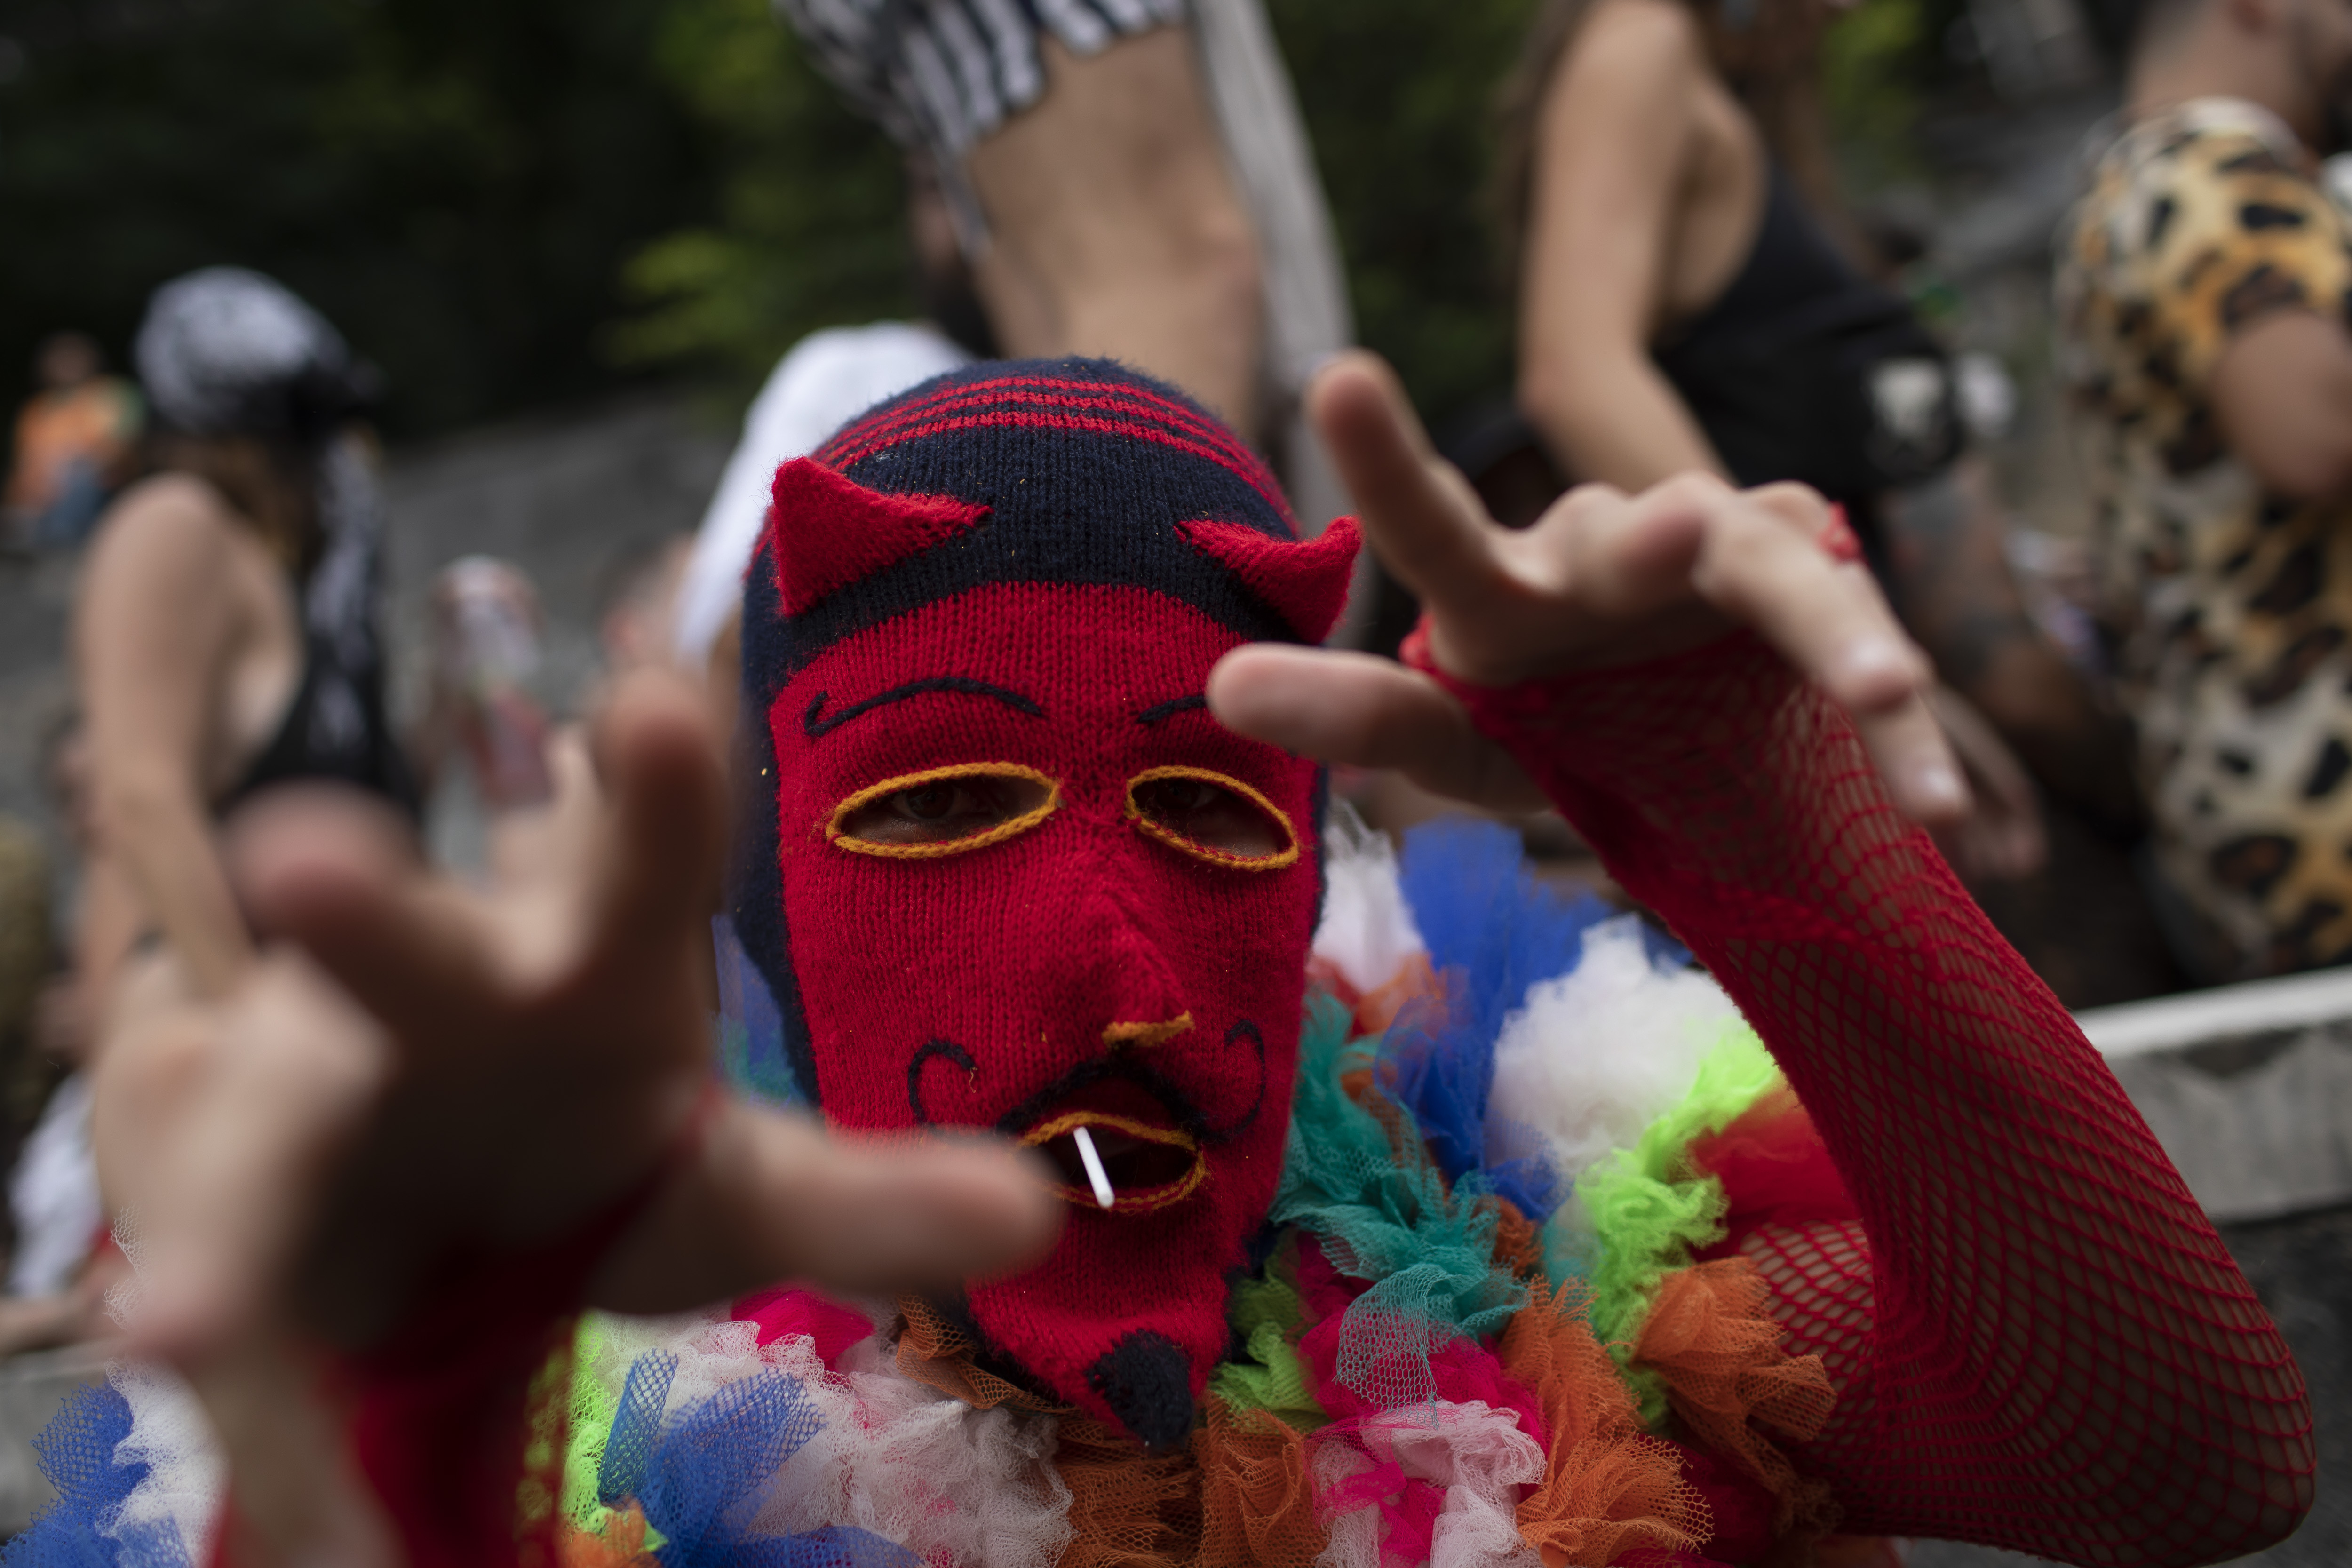 An attendee wears a Peruvian mask during a group pre-carnival street party "Saturday Has Nothing", in Rio de Janeiro, Brazil, on January 28, 2023. The world-famous Rio Carnival begins on February 17.  (AP Photo/Bruna Prado)